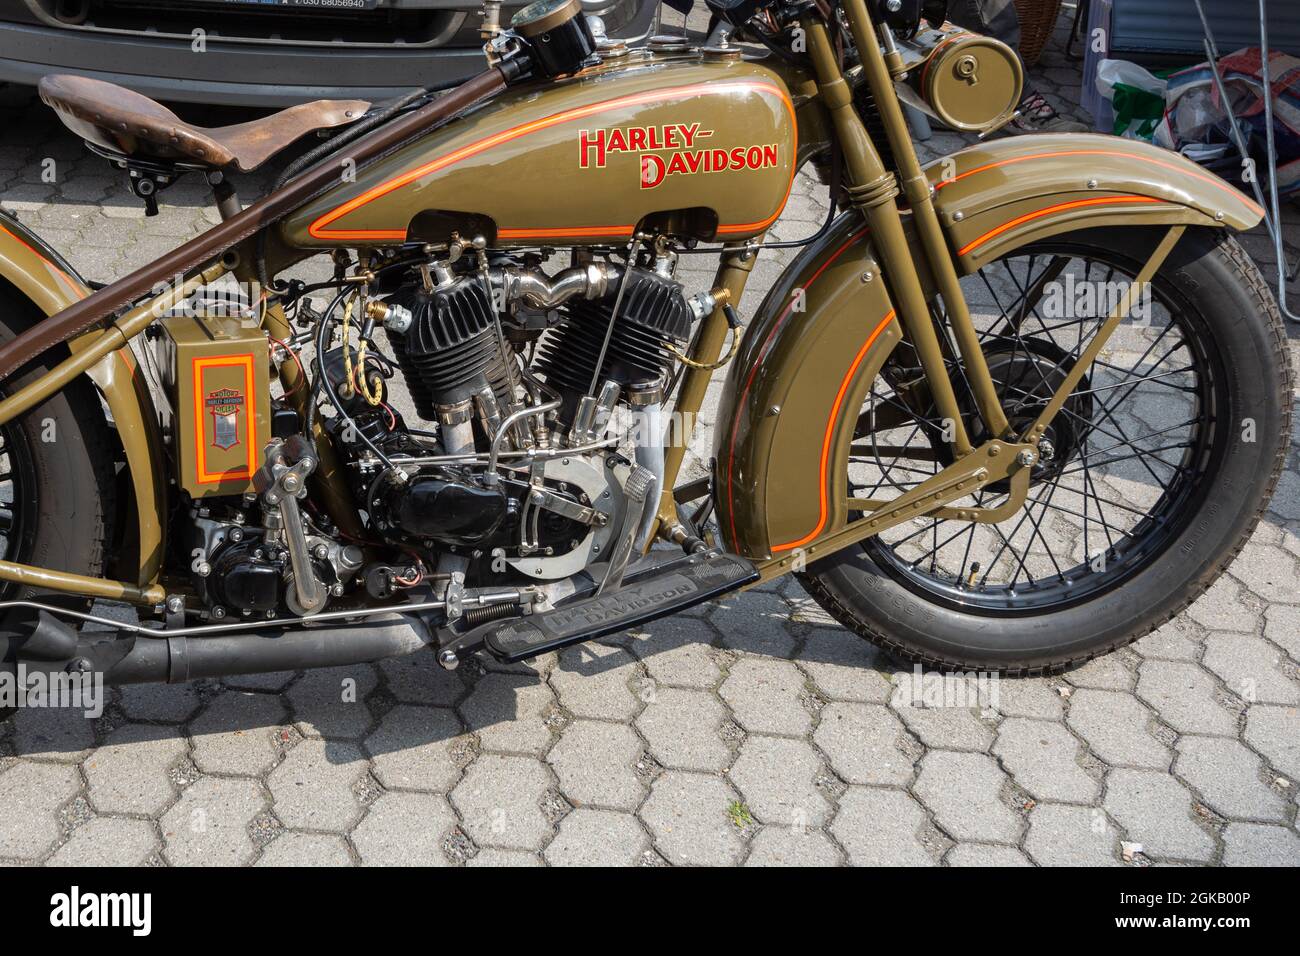 Harley Davidson JD from 1928 in a very good restored condition - view from the side Stock Photo